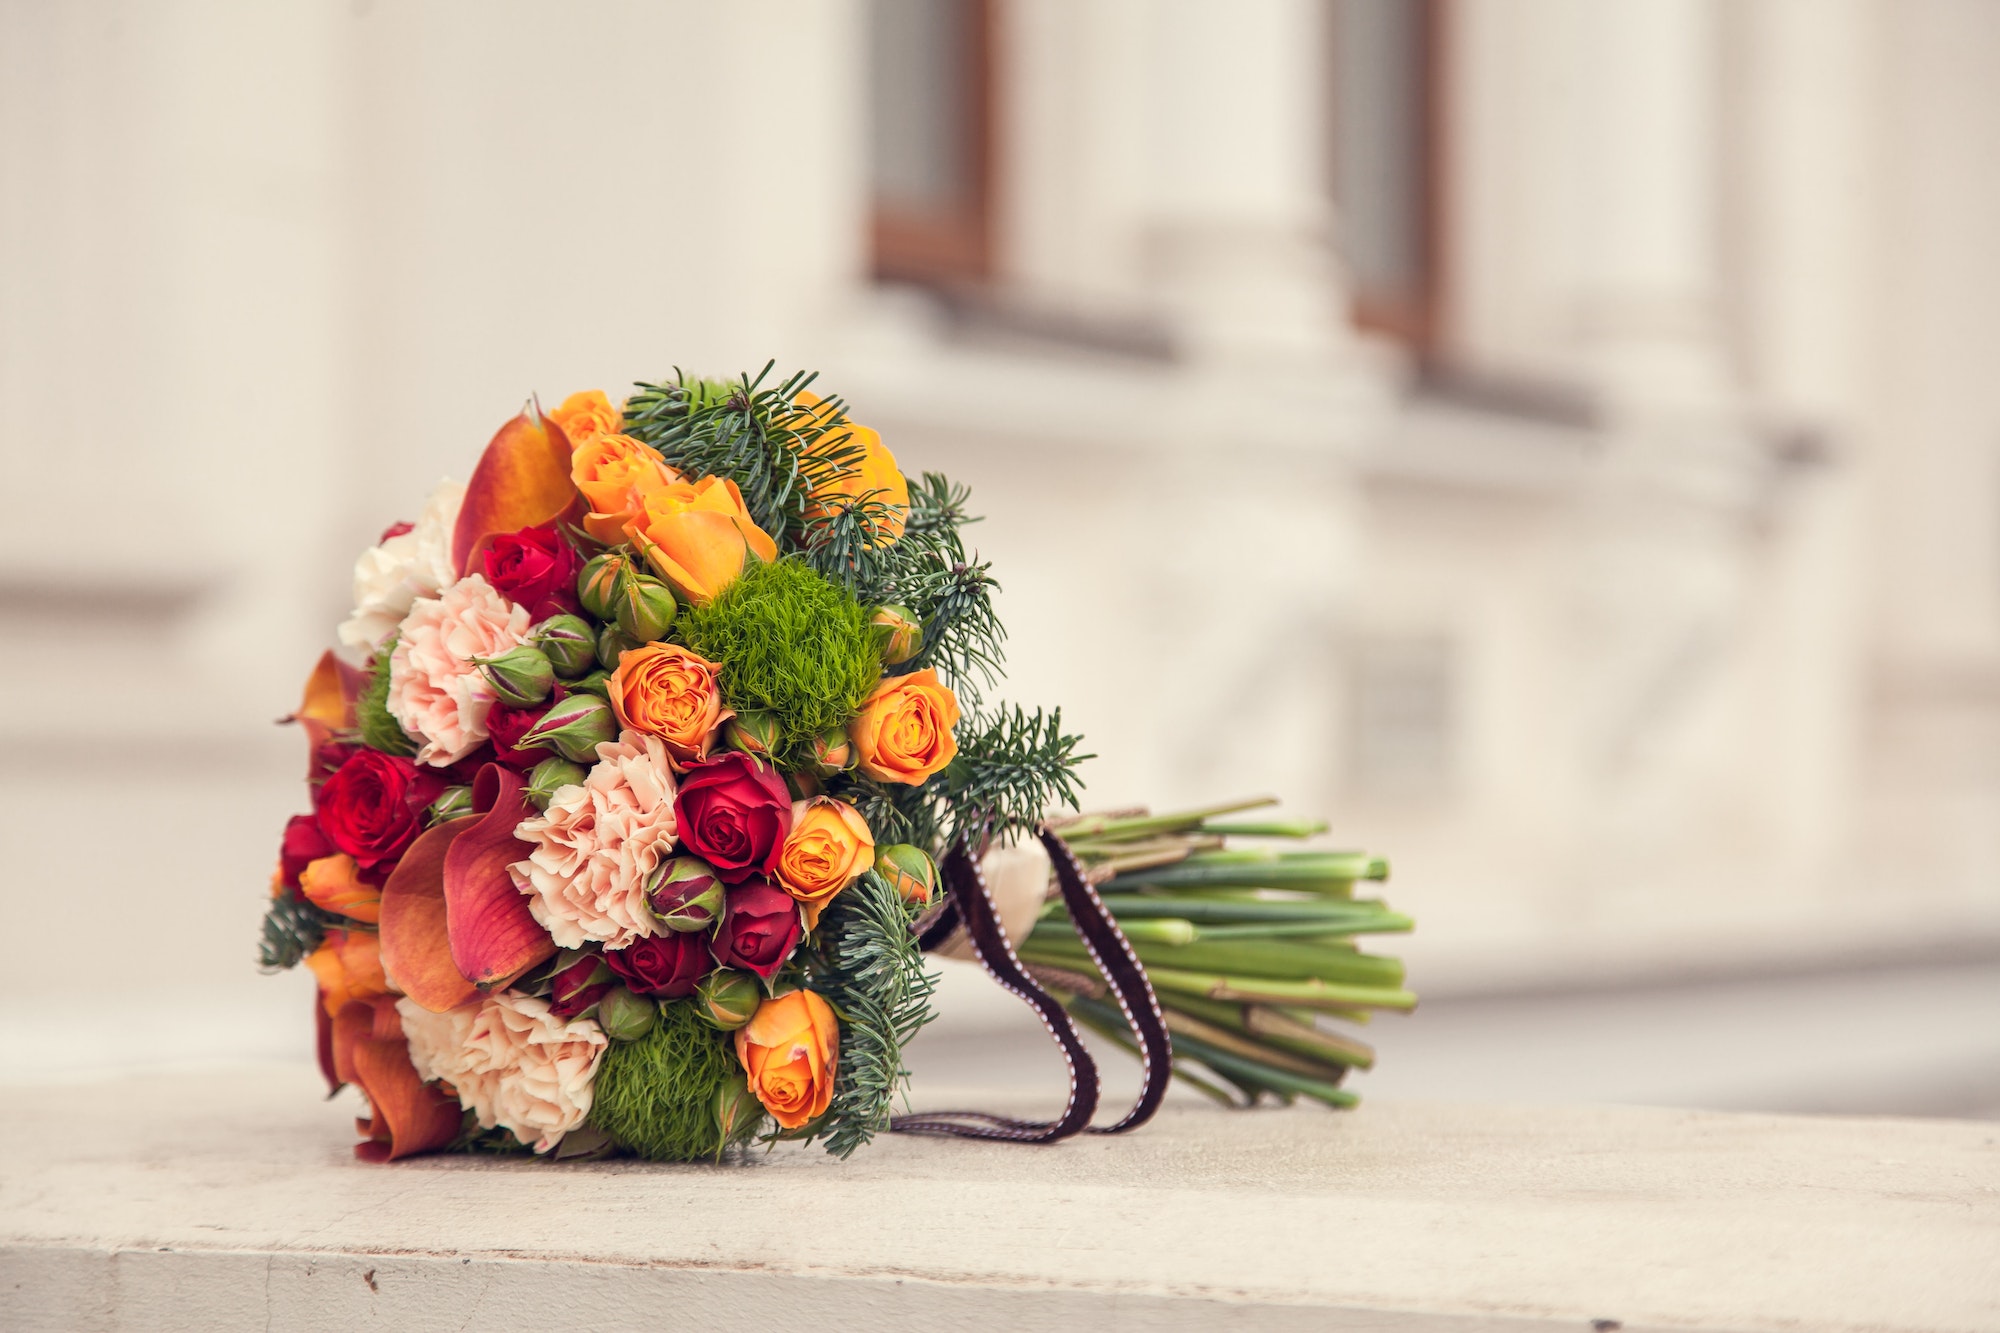 Bridal bouquet in winter or autumn style with carnation, roses, buds, spruce, calla flower